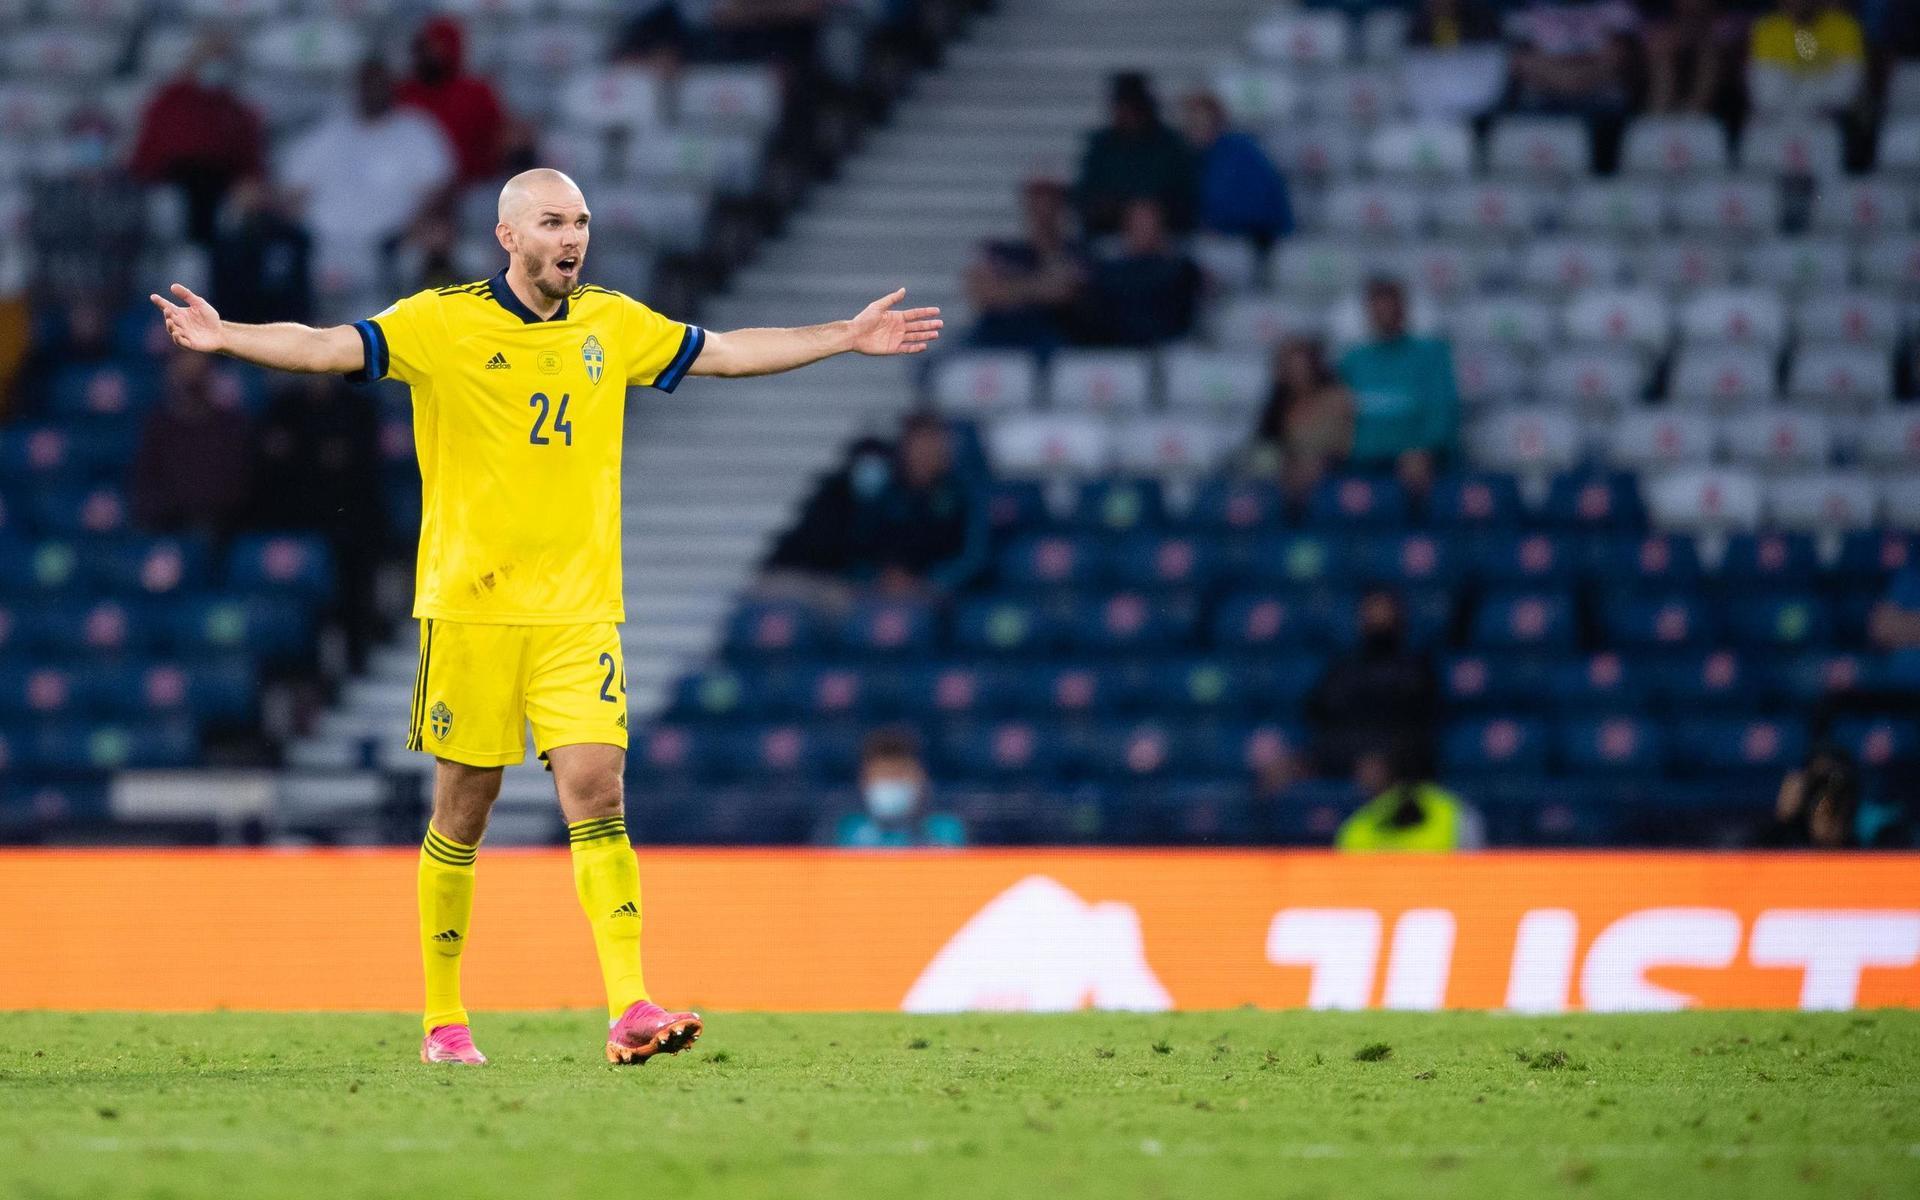 Marcus Danielson of Sweden looks dejected after a red card during the UEFA Euro 2020 Football Championship round of 16 match between Sweden and Ukraina on June 29, 2021 in Glasgow.